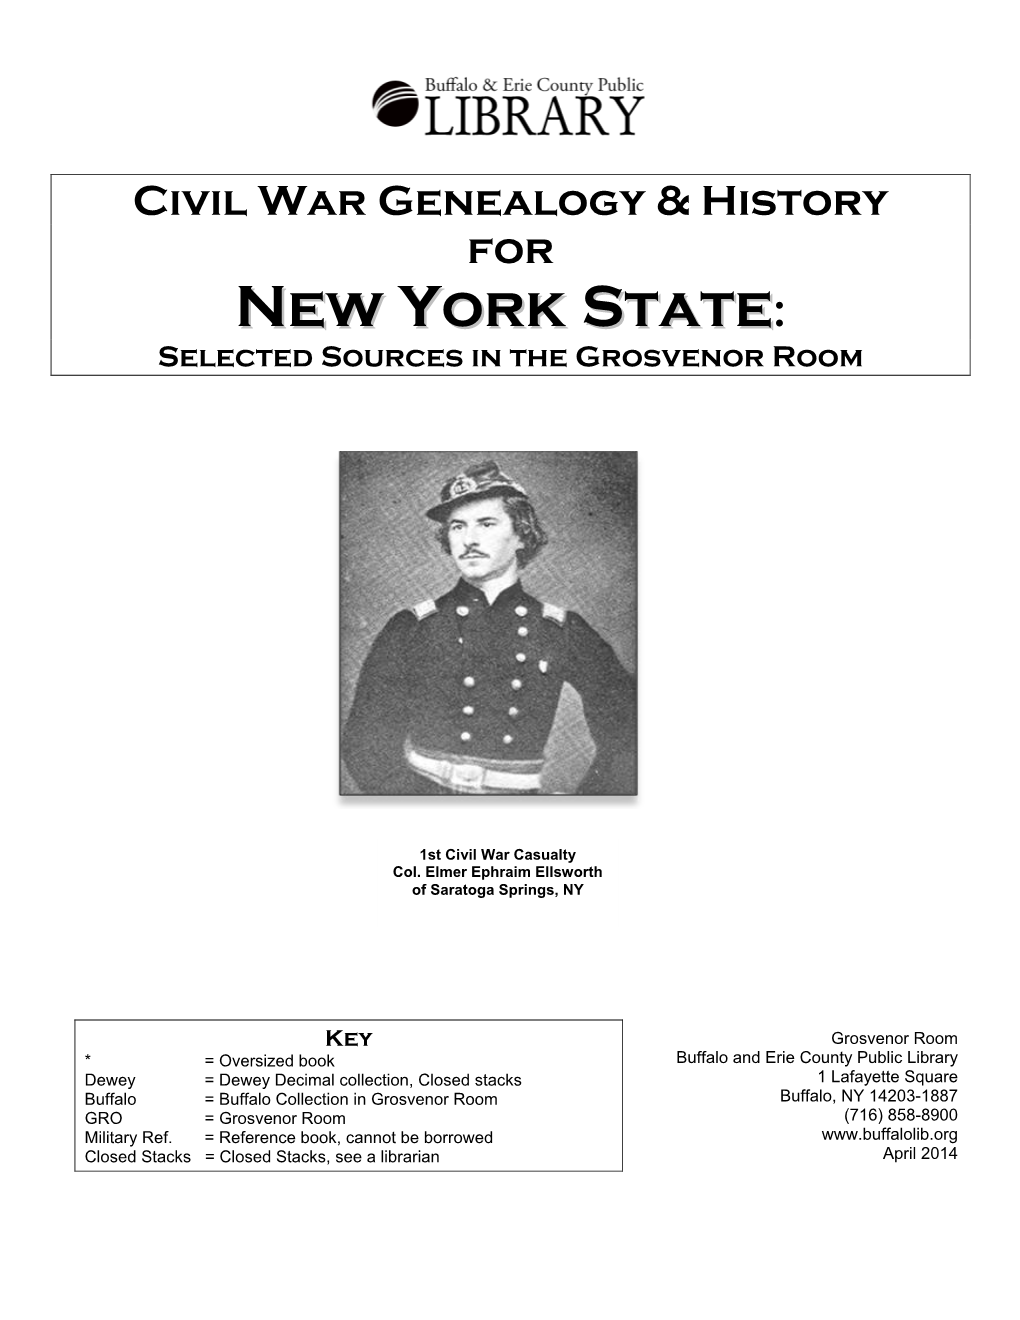 Civil War Resources for New York State